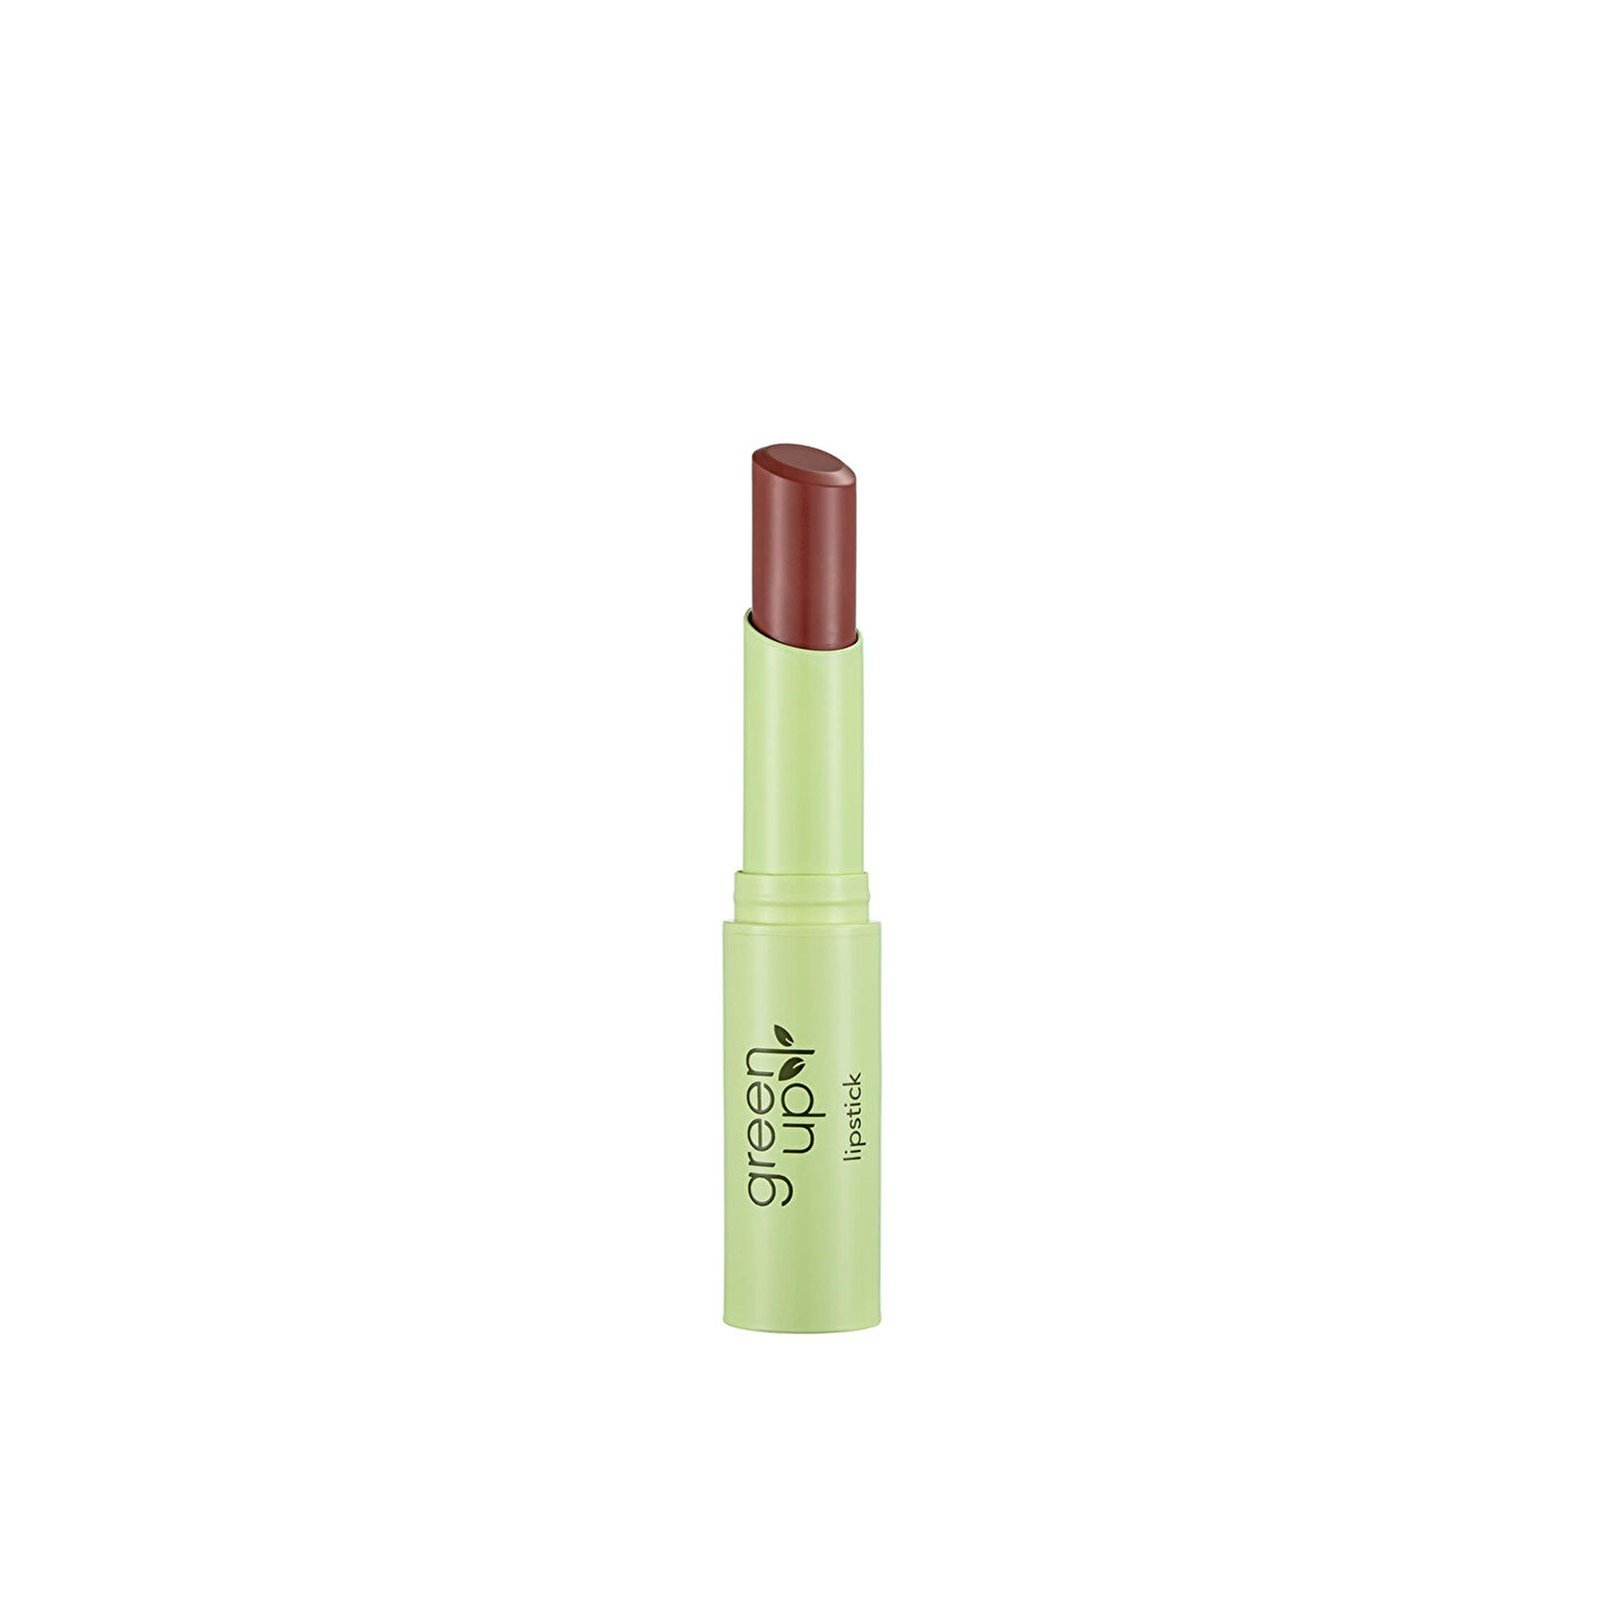 Flormar Green Up Lipstick 002 Back To Nature 3g (0.11 oz)